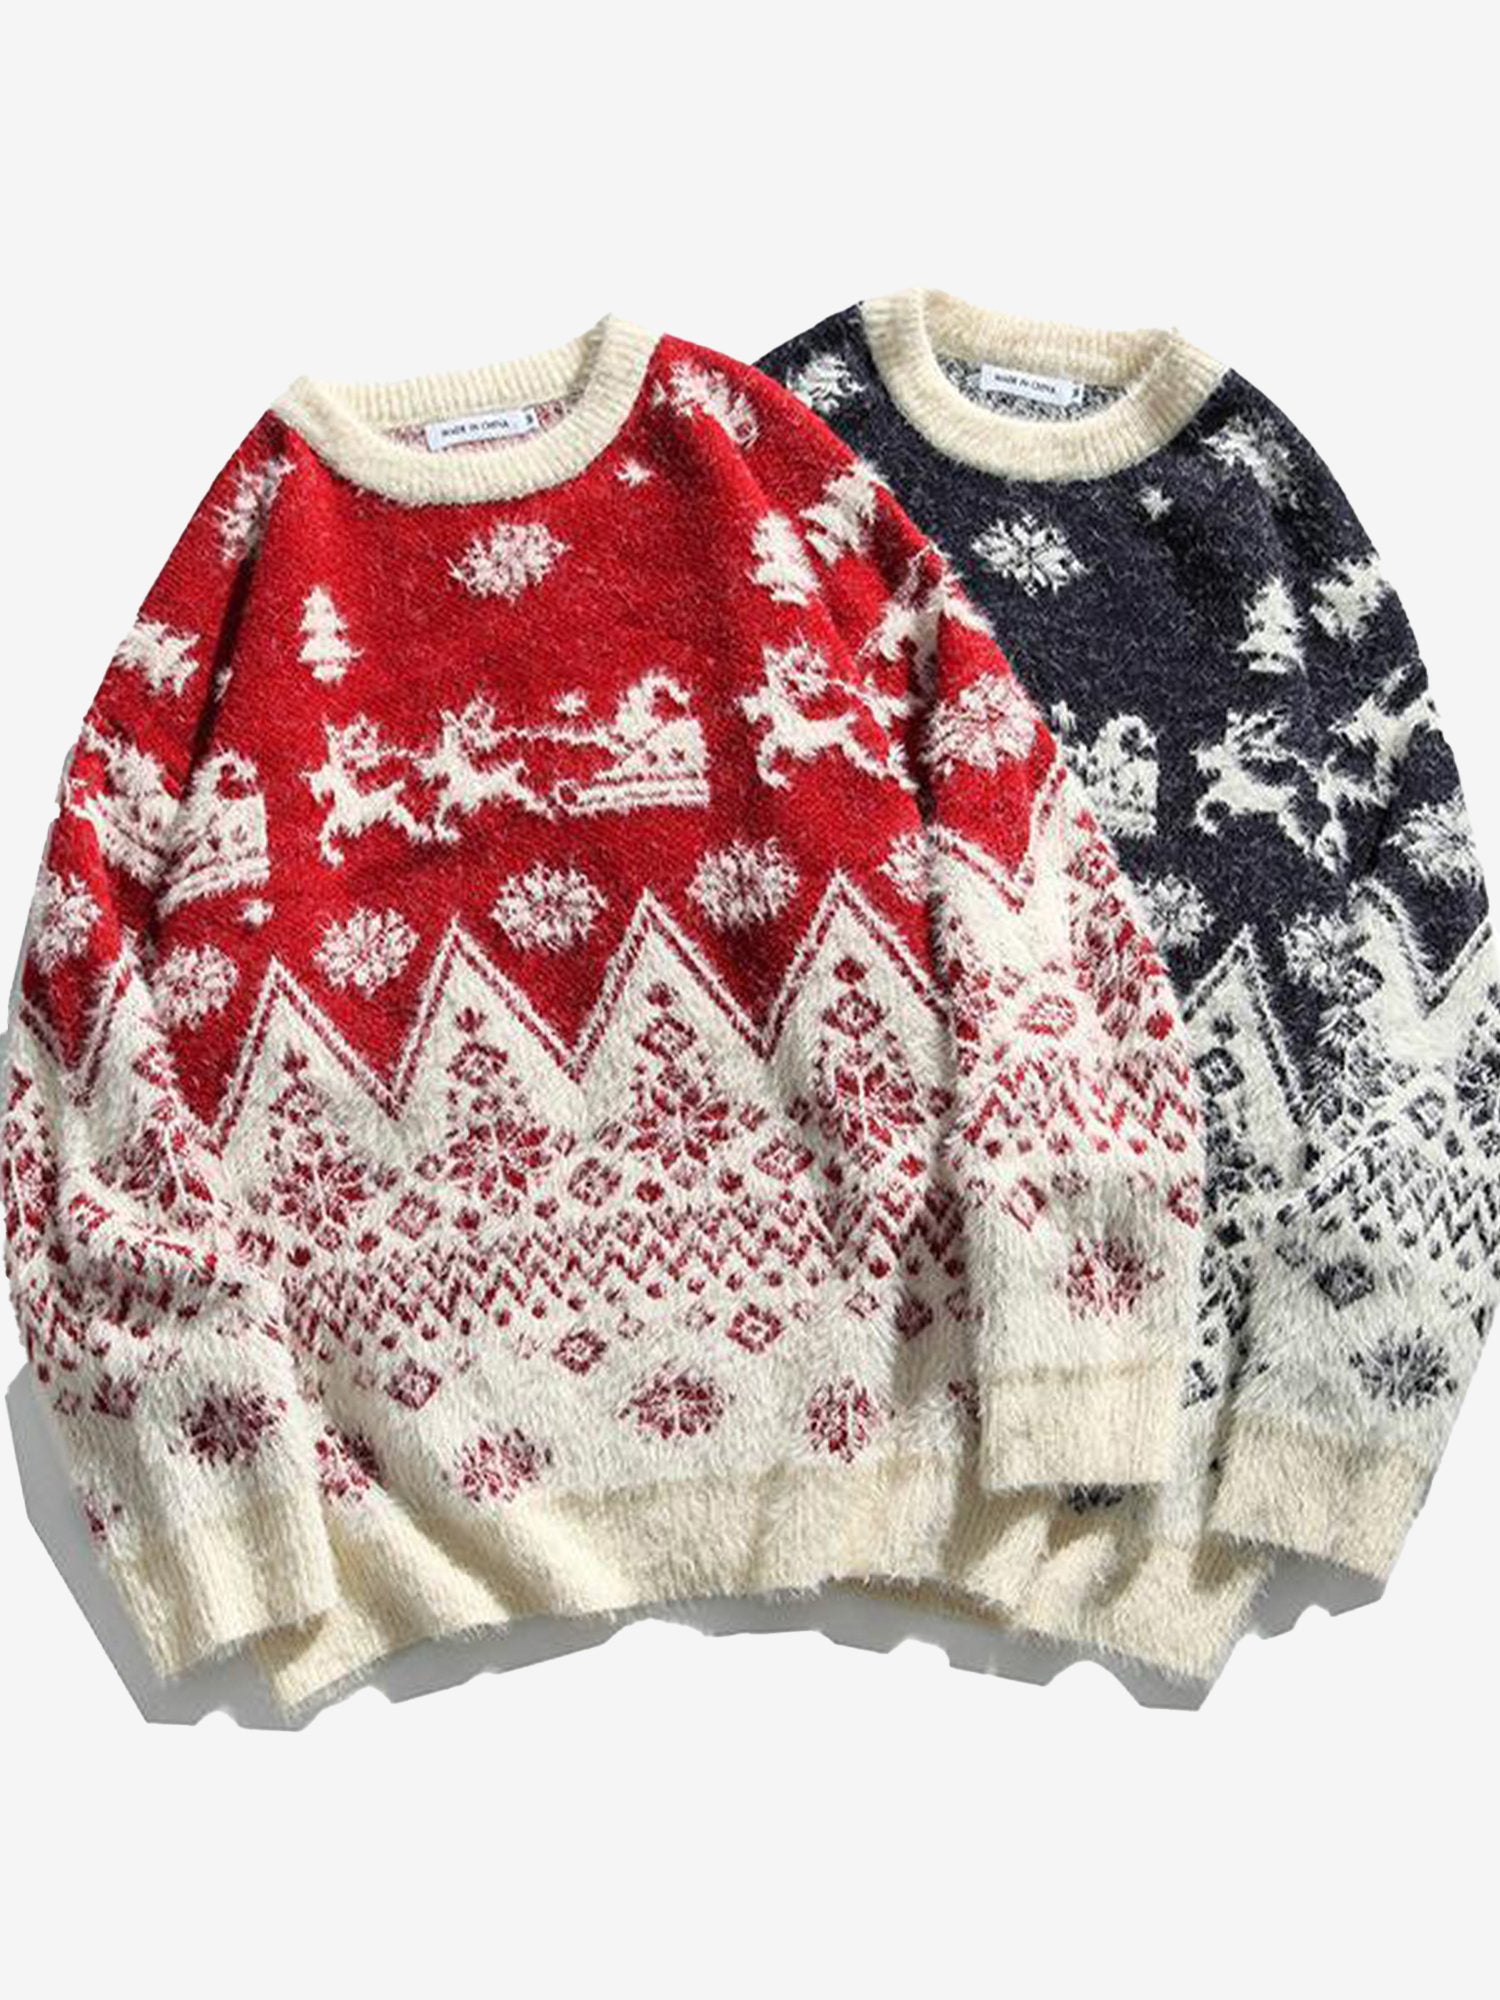 JUSTNOTAG Christmas Fashion Print Round Neck Holiday Sweater